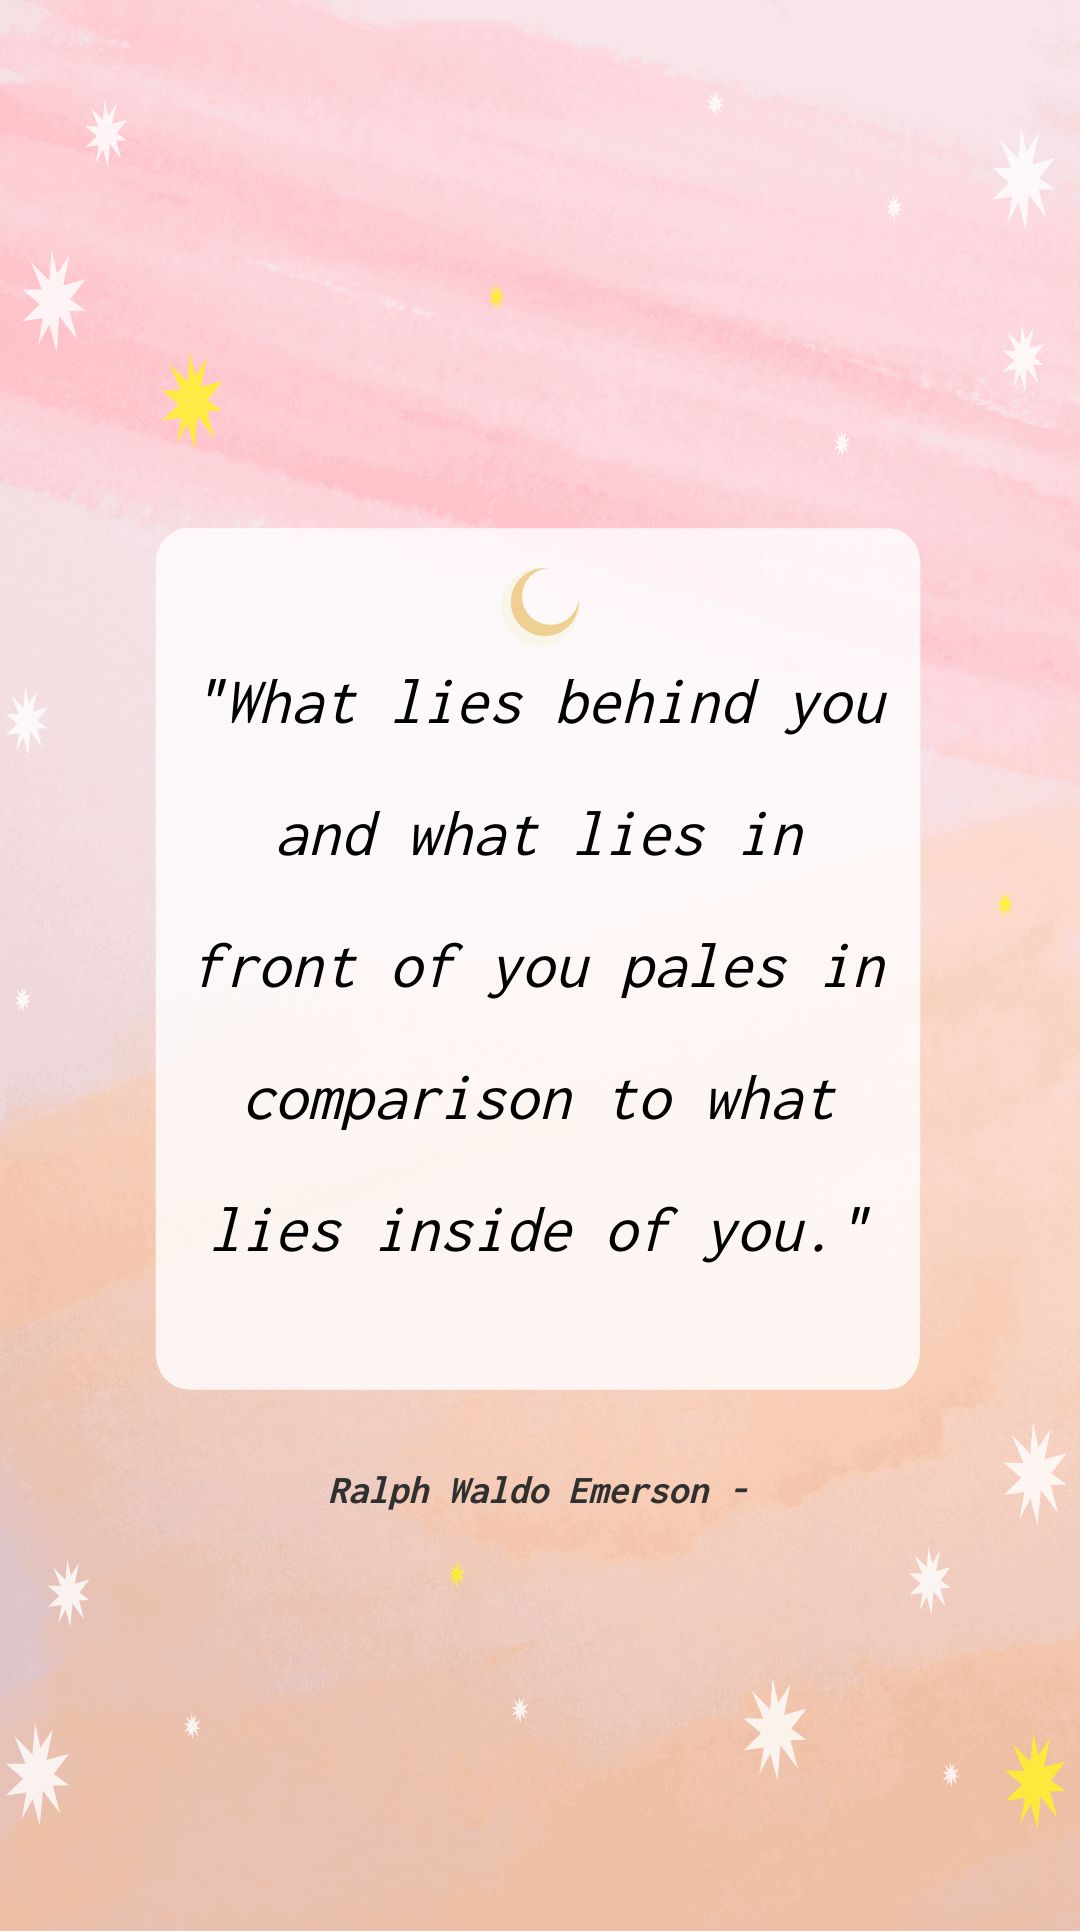 Ralph Waldo Emerson - What lies behind you and what lies in front of you pales in comparison to what lies inside of you.